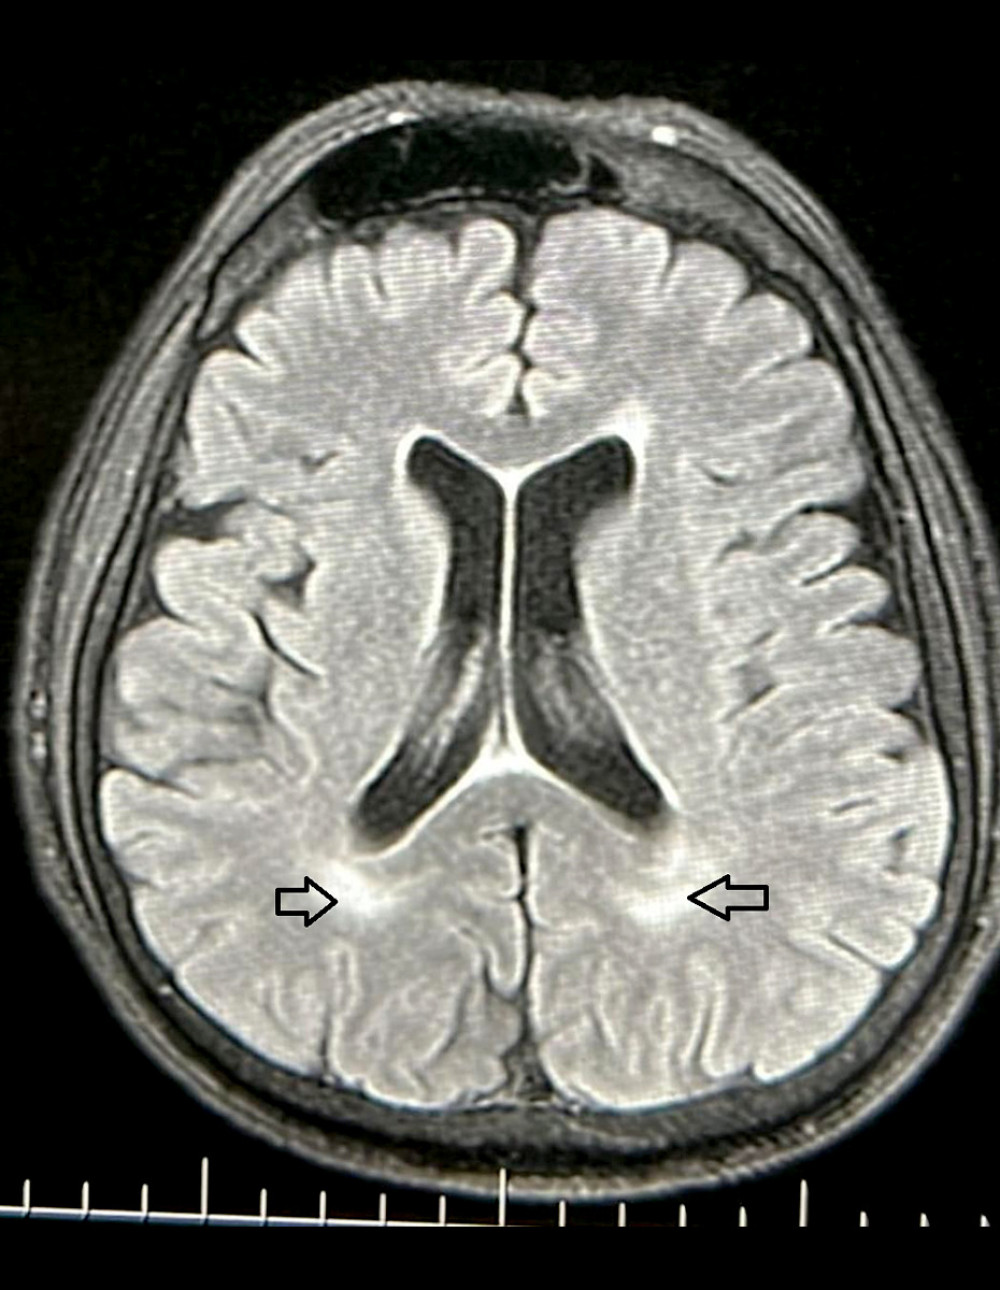 Axial section of periventricular white matter lesions in a T2 weighted magnetic resonance image. The lesions in cerebral white matter are shown (arrows) in a patient with House-Brackmann grade 5 Bell’s palsy. This figure was created using PowerPoint 2013 (Microsoft).